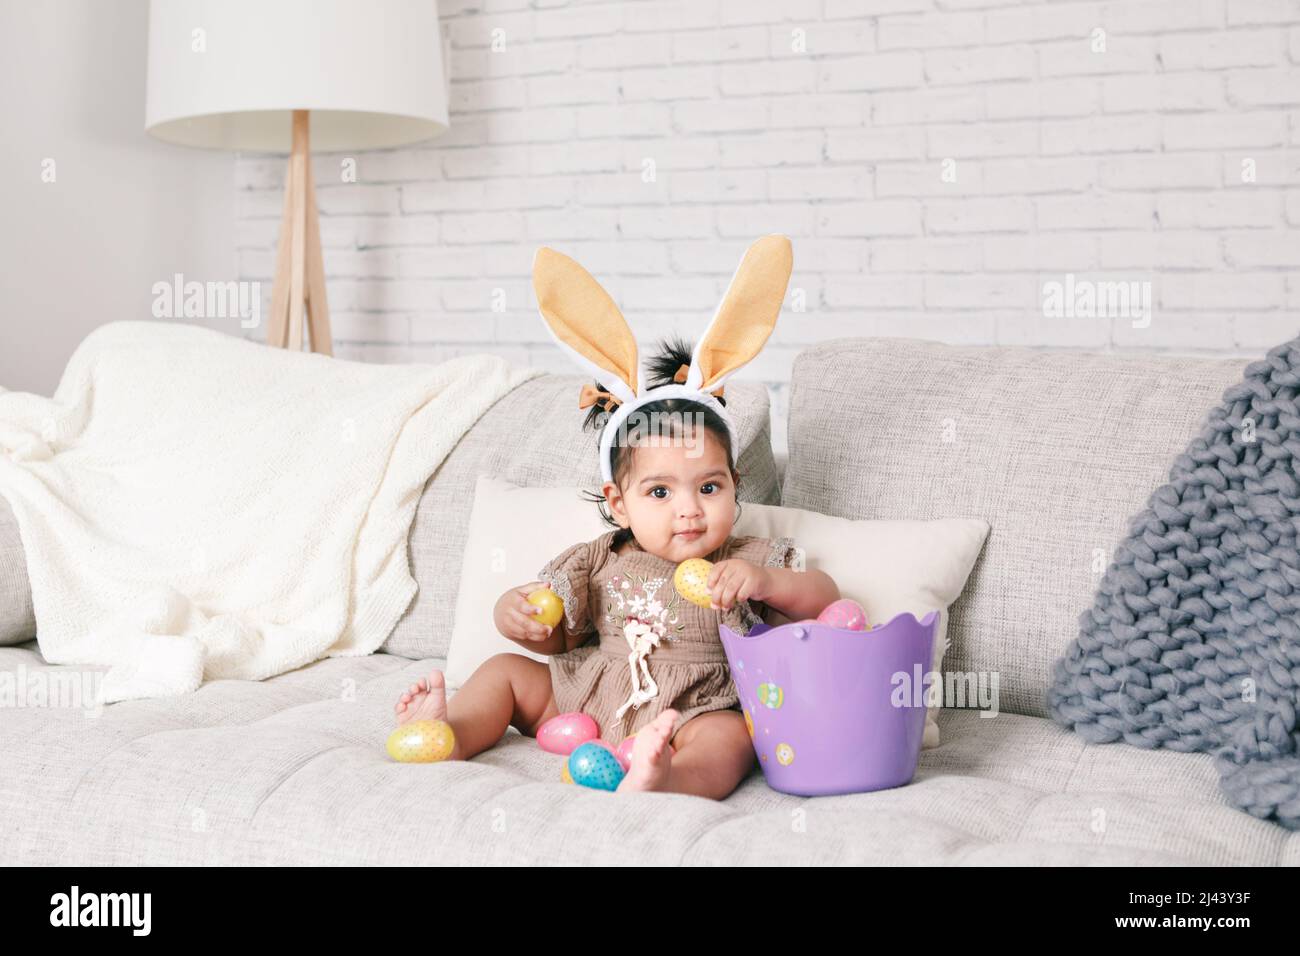 Cute Indian baby girl with pink bunny ears and basket of colorful eggs celebrating Easter holiday. Stock Photo